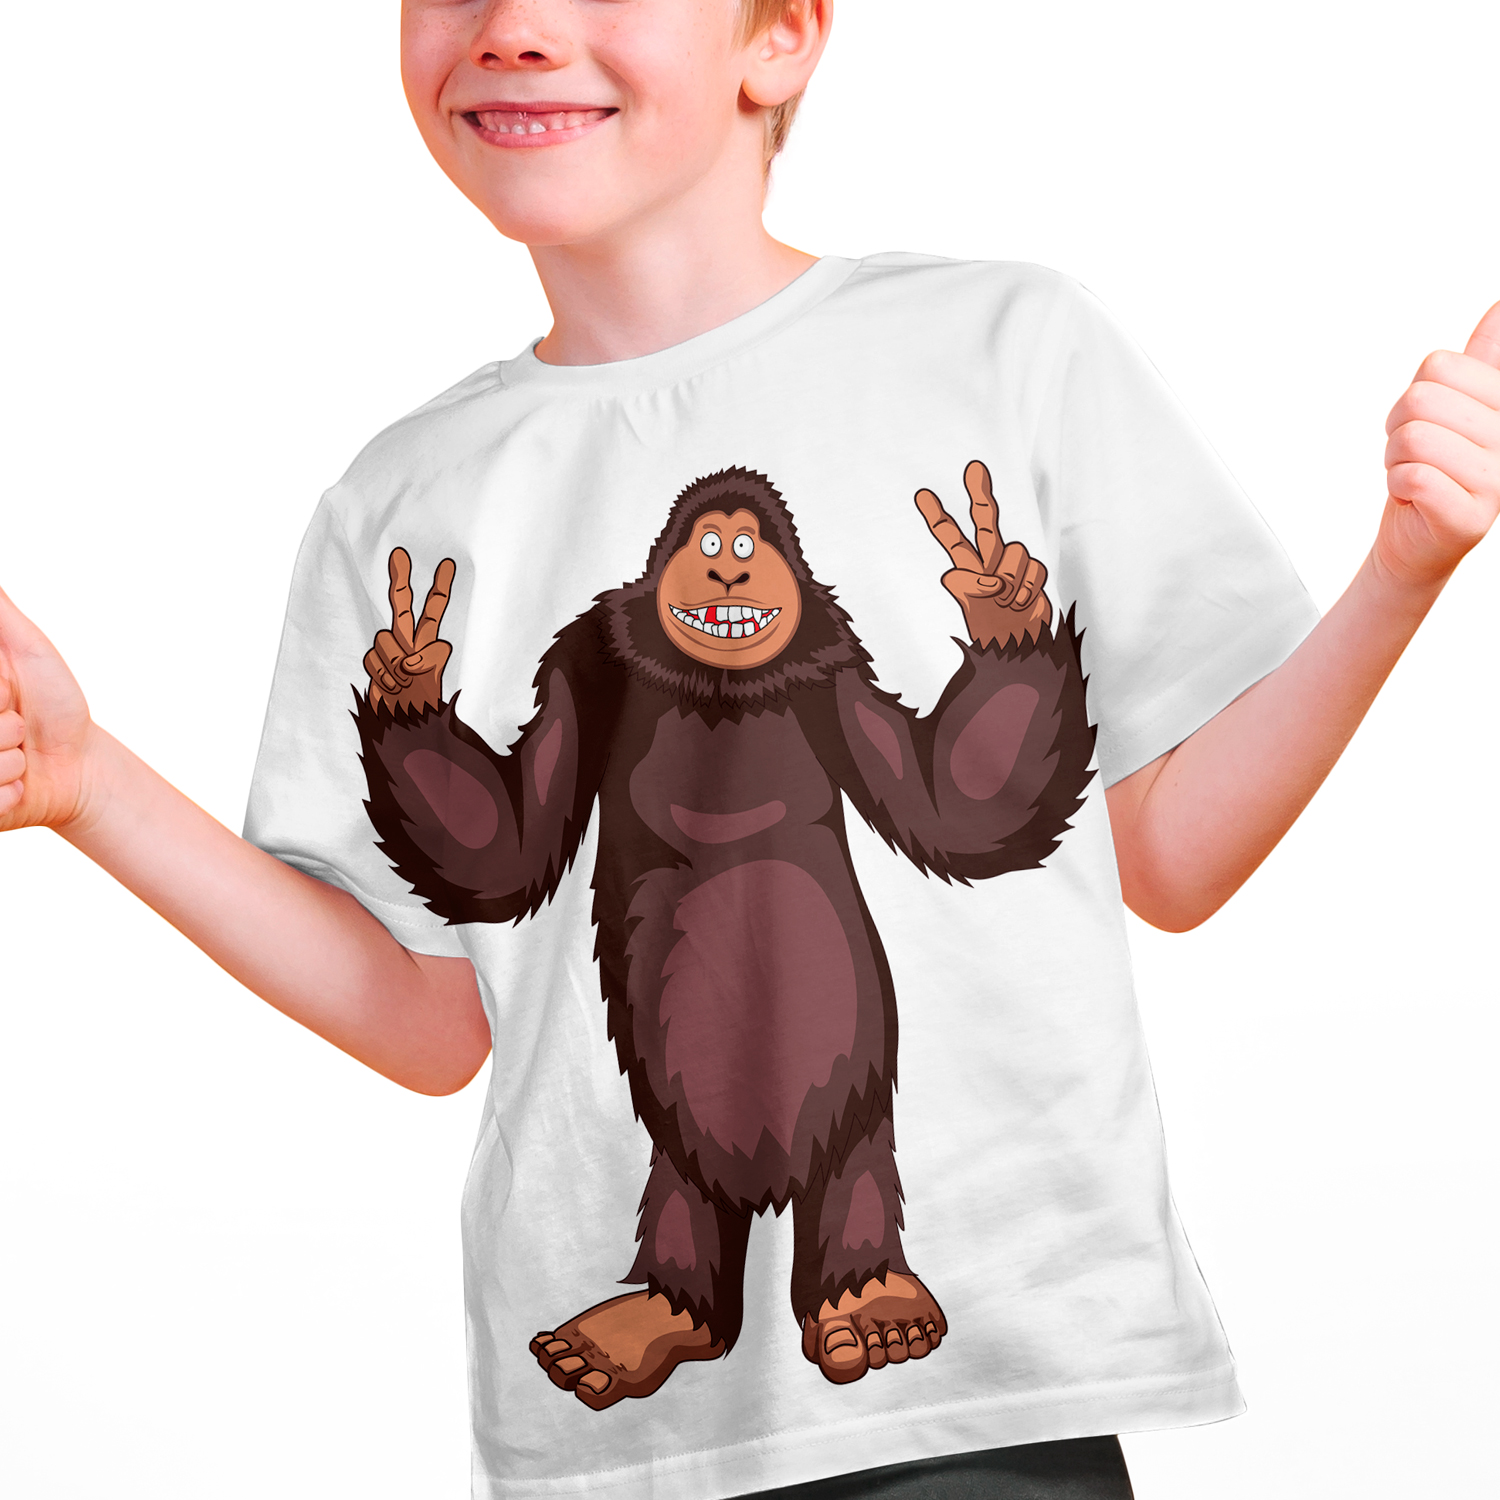 Young boy wearing a t - shirt with a cartoon gorilla on it.